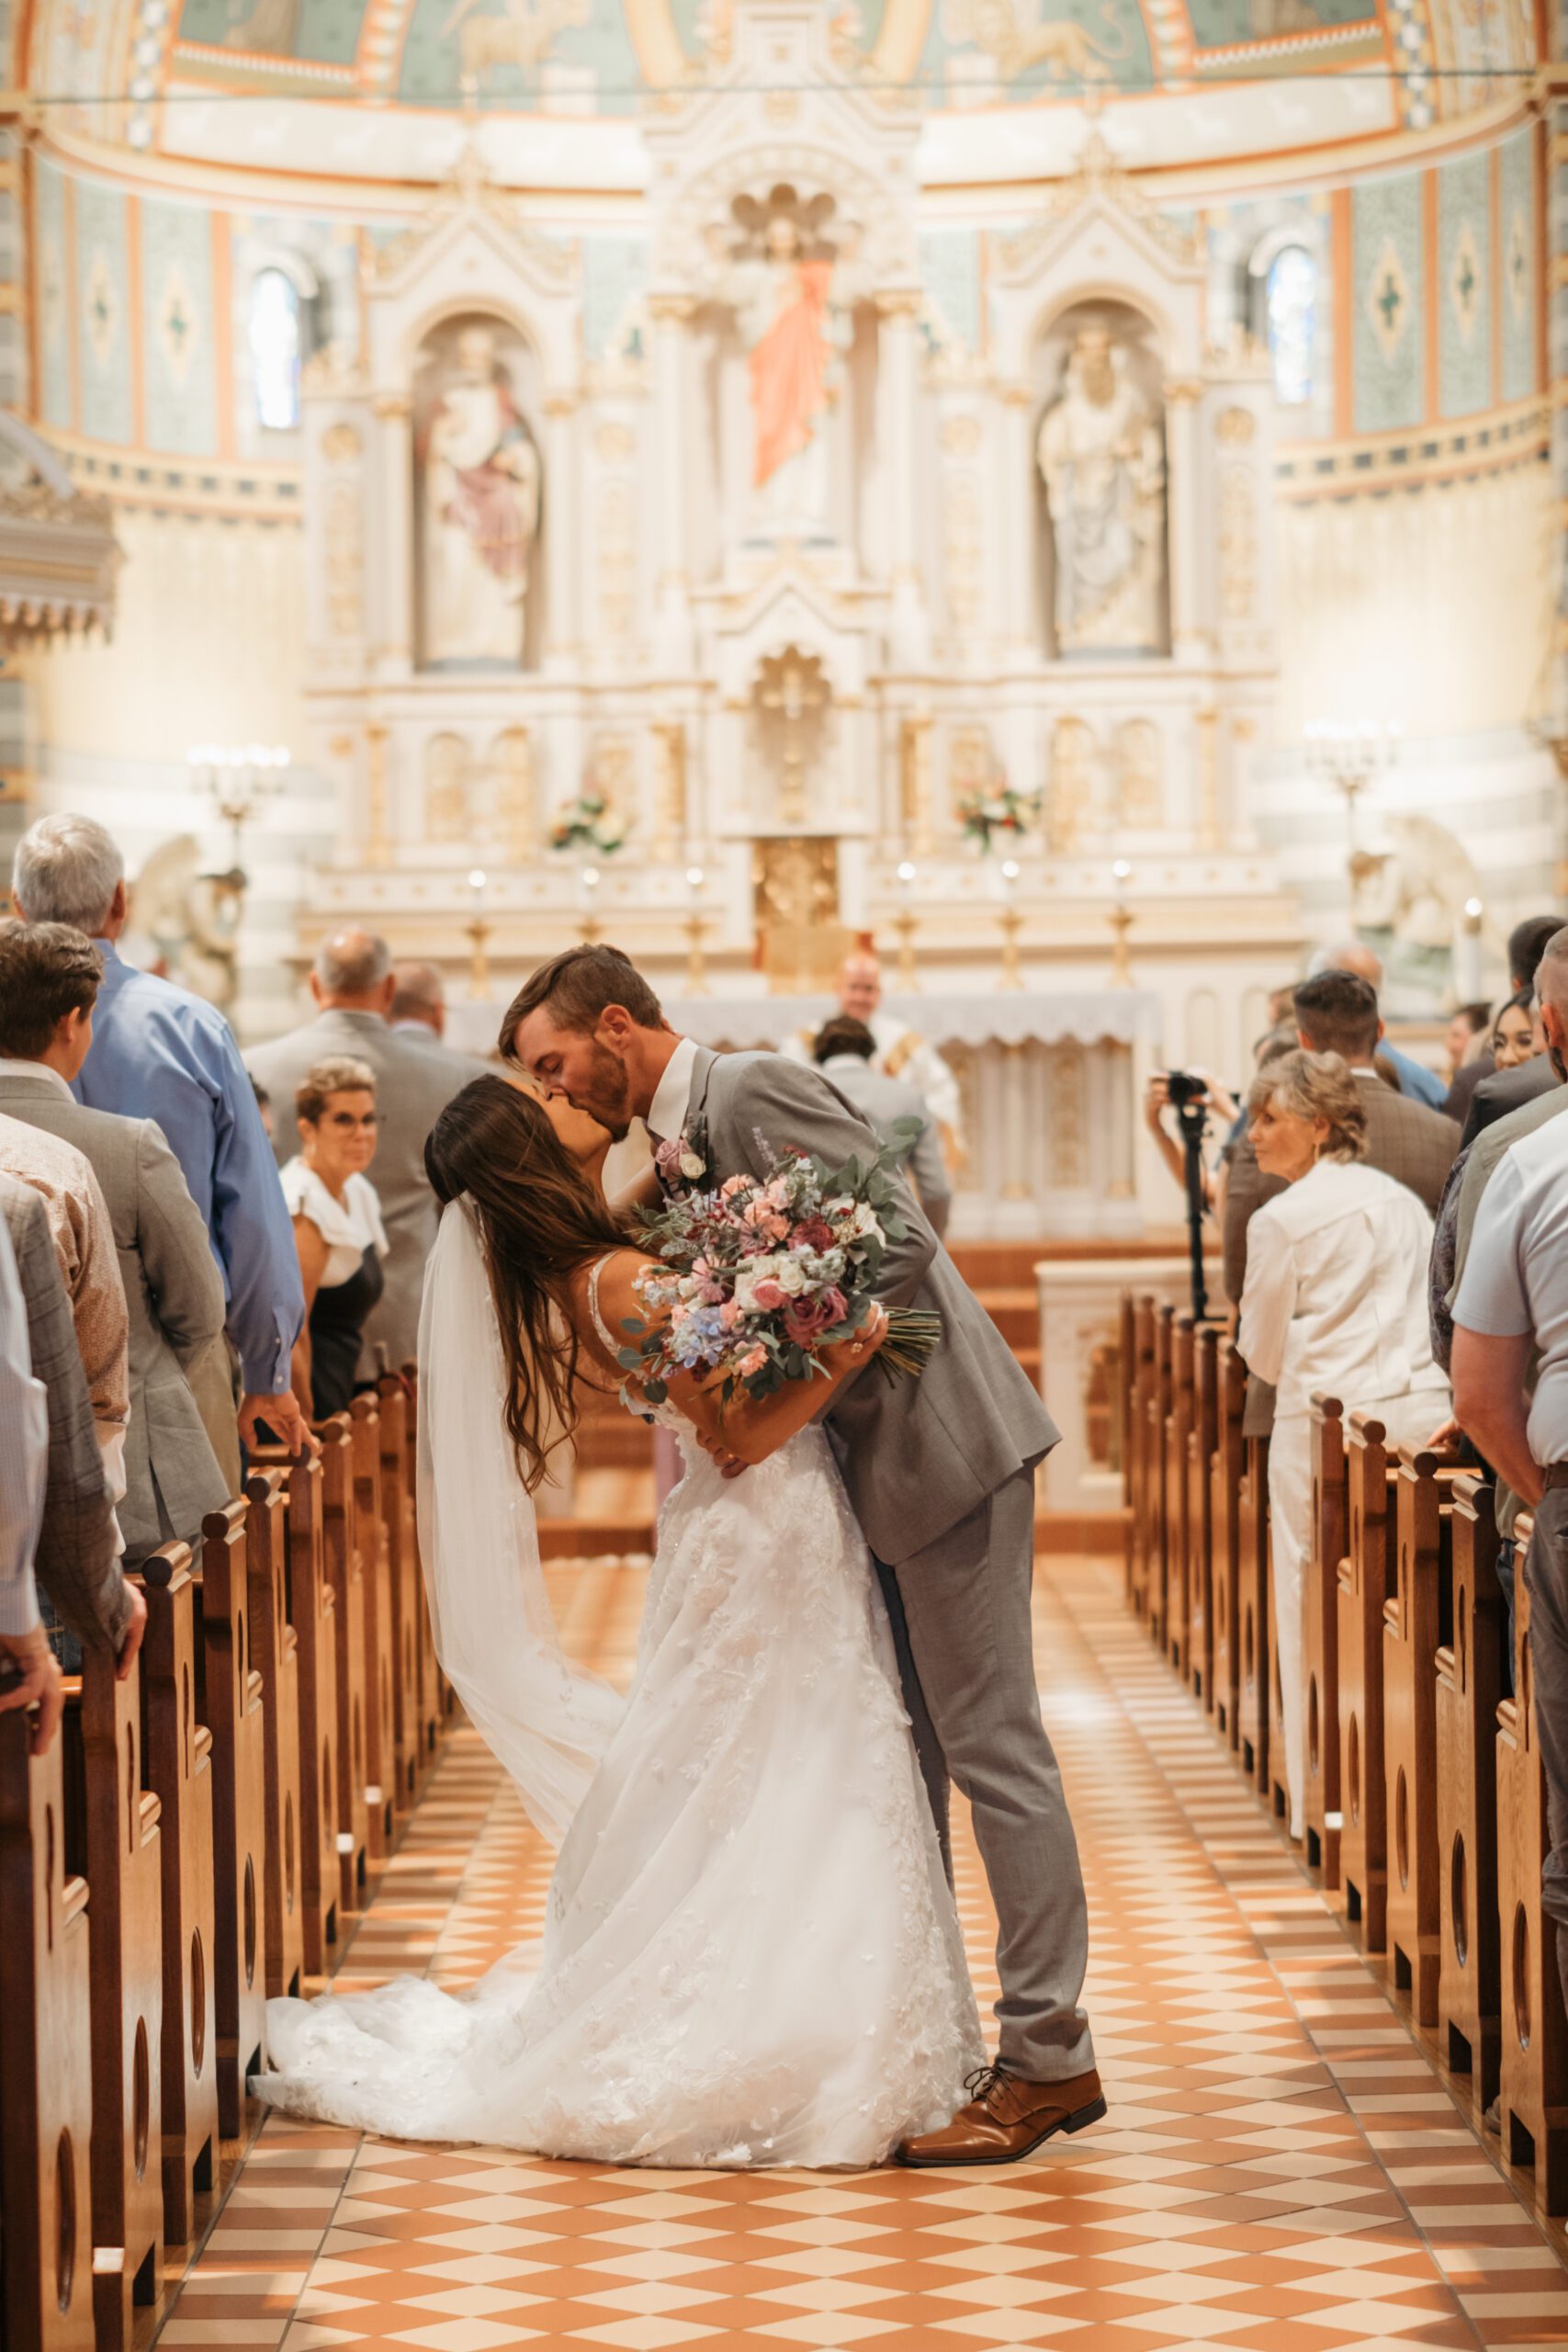 Everything you need to know about getting married in the Catholic Church